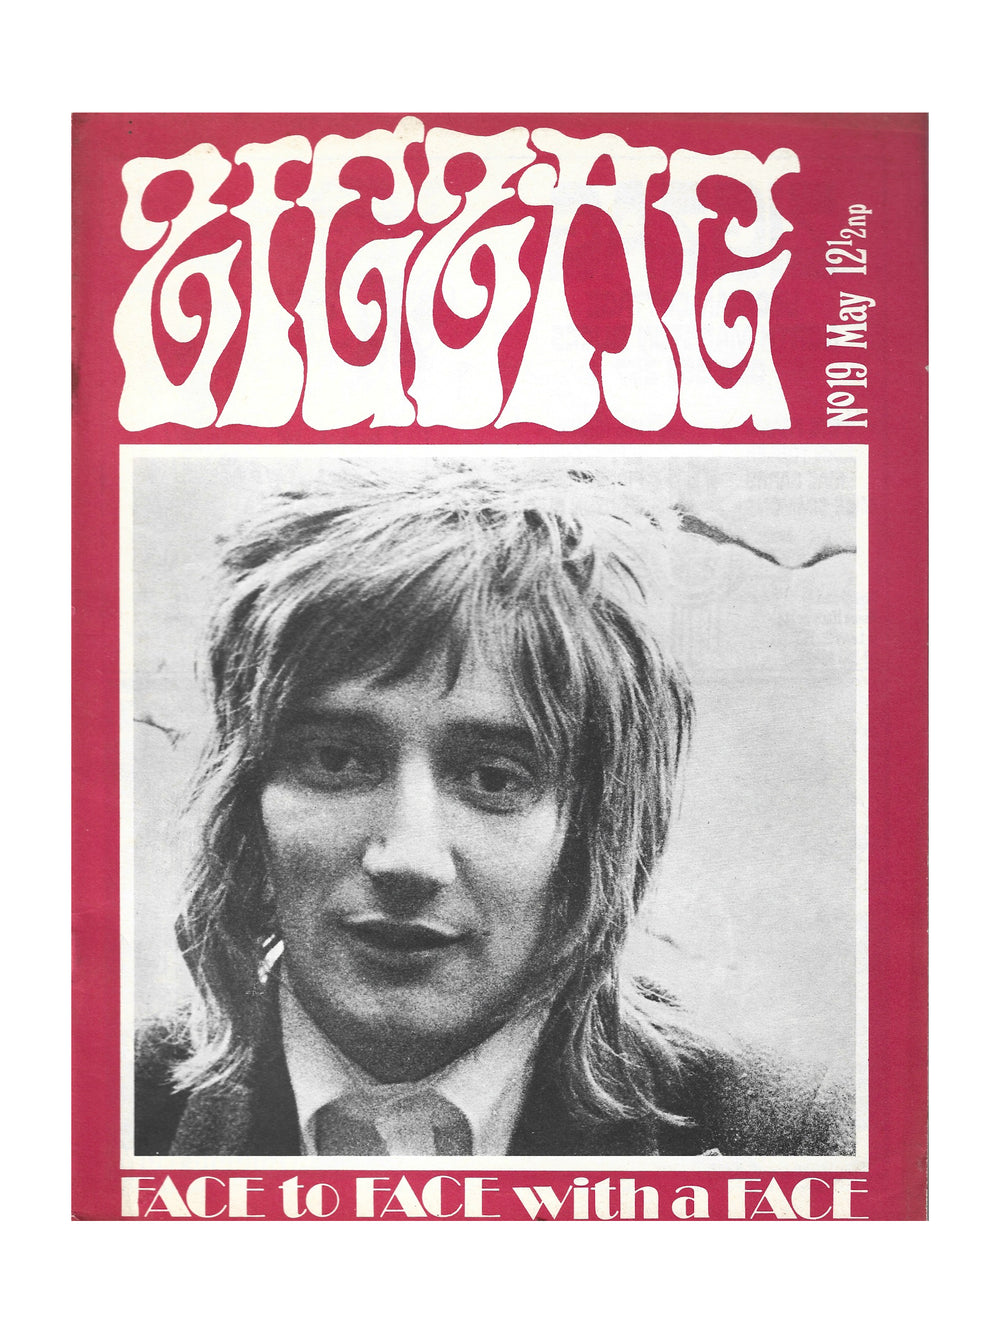 Rod Stewart ‎– The Faces ZigZag Magazine No 19 May Mint